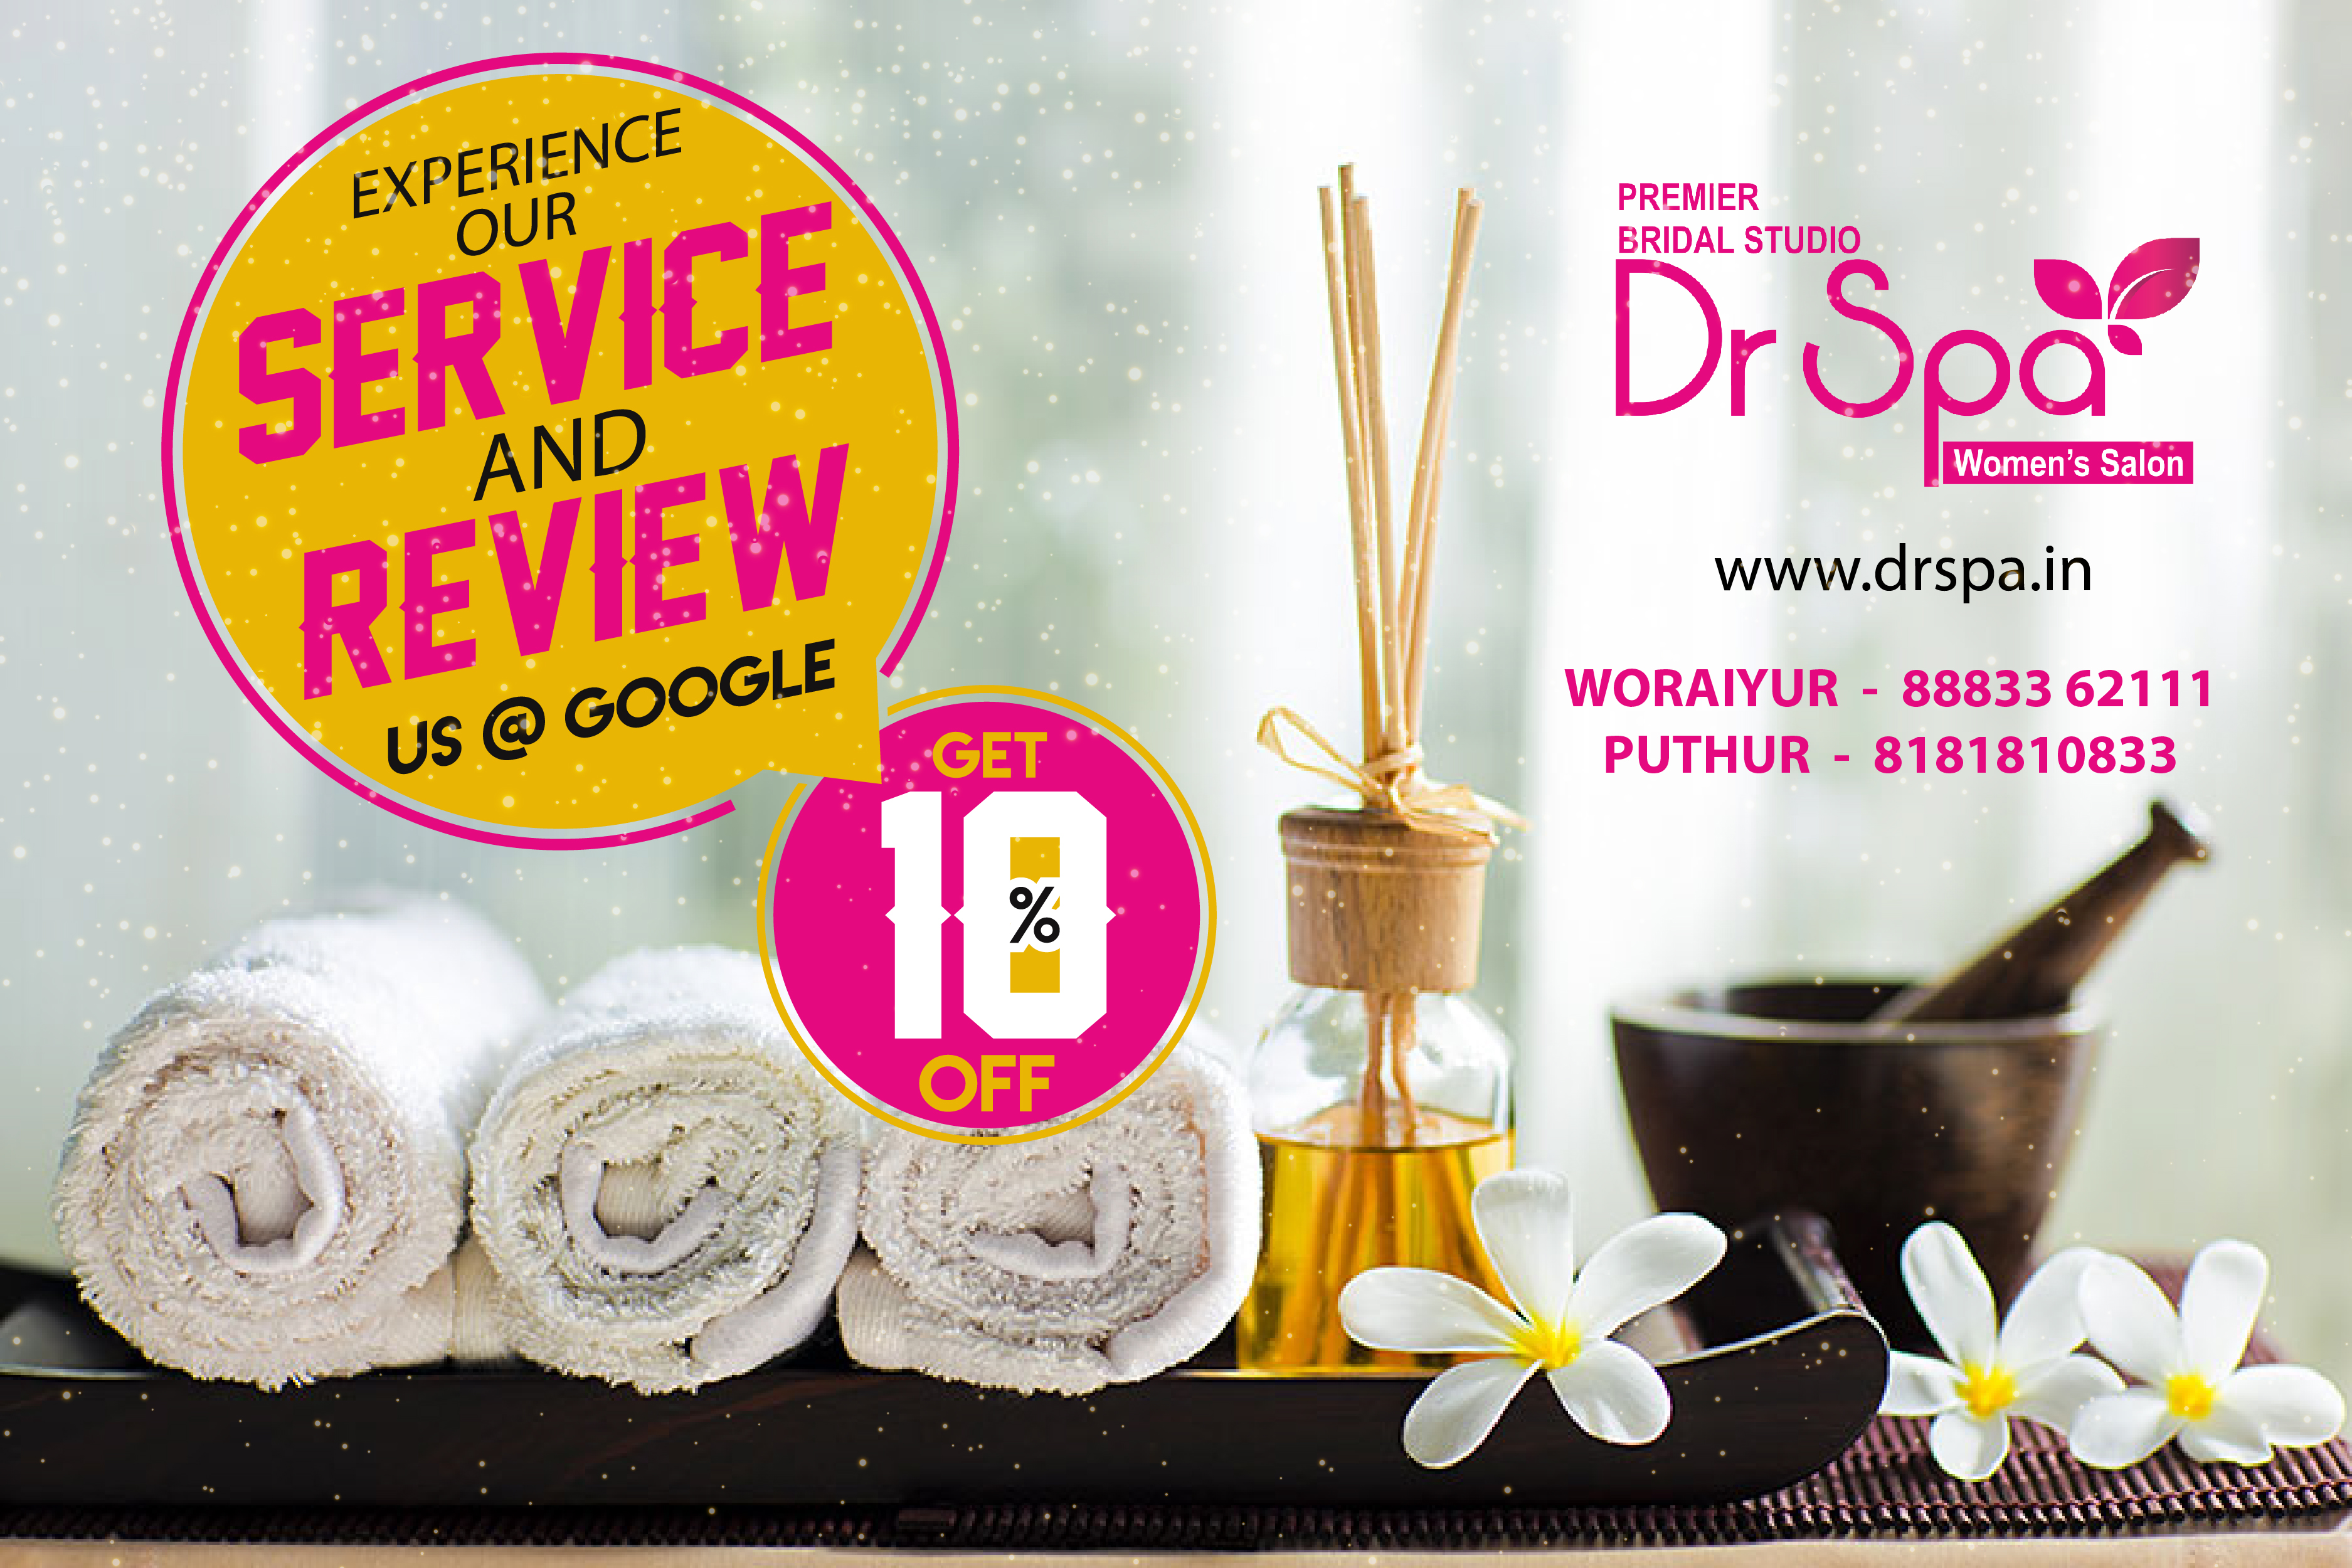 Experience our service and review us Google - GET 10% Off